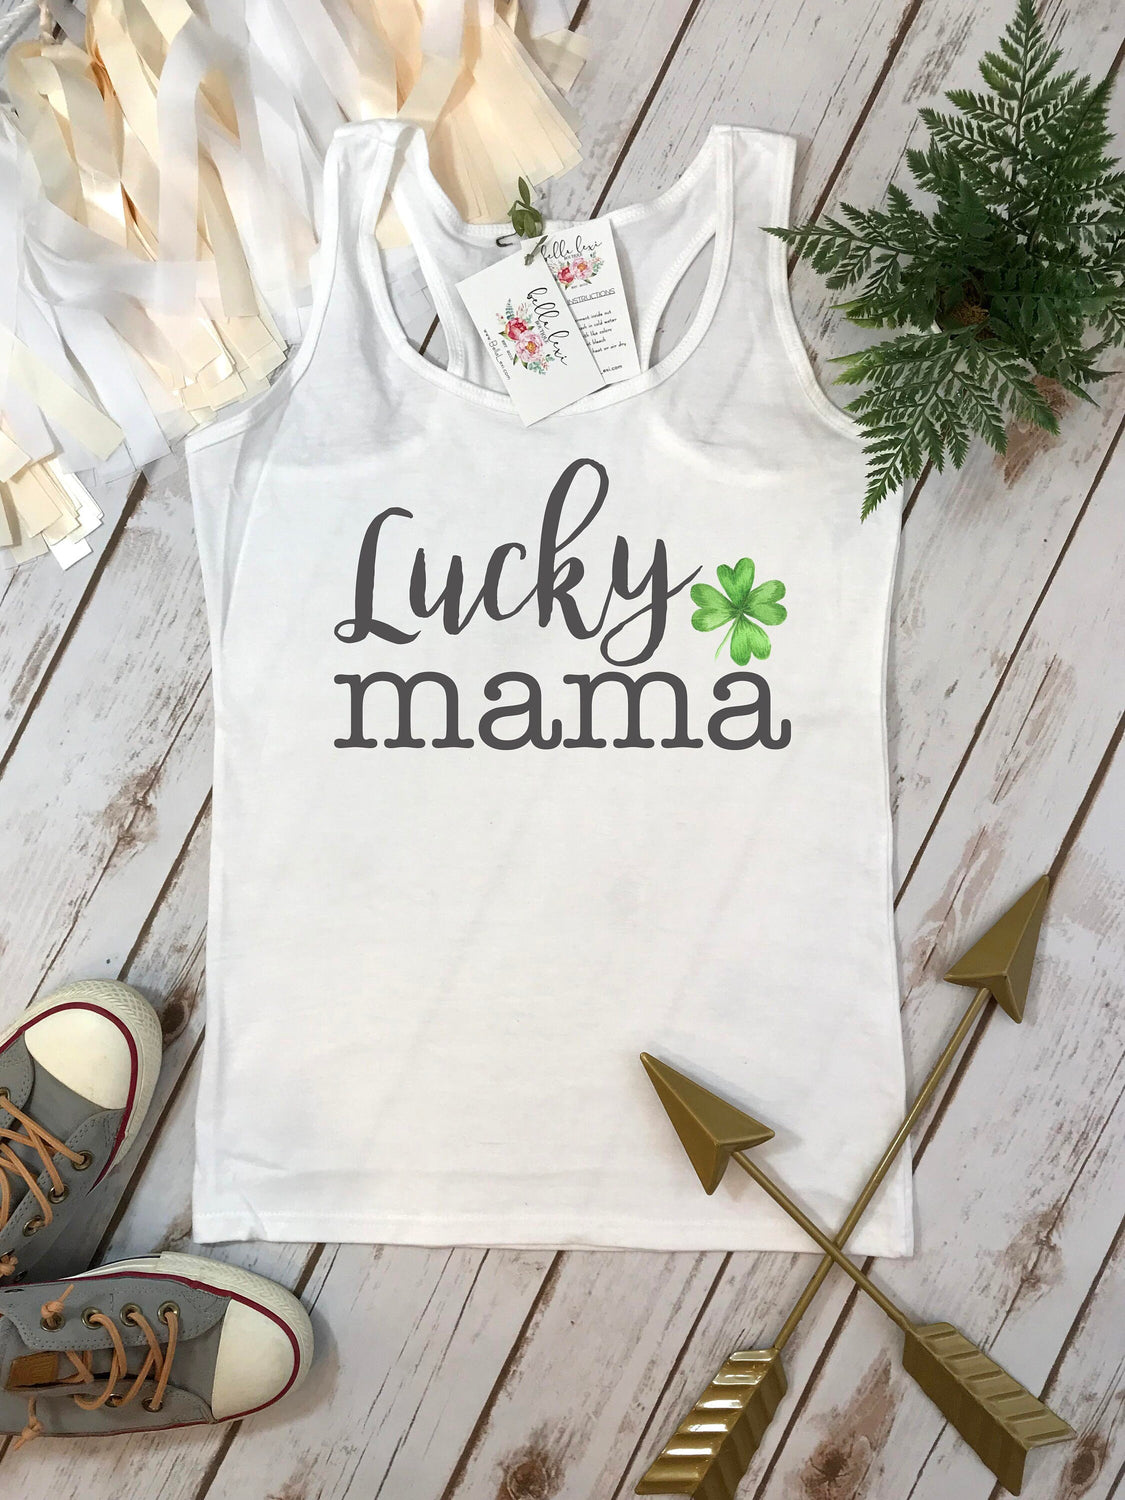 Lucky Mama Shirt, St. Patrick's Day Shirts, Mommy and Me shirts, Mommy and Me Outfits, St. Patty's Day, Lucky Mom Shirt, Mom Shirts, Clover